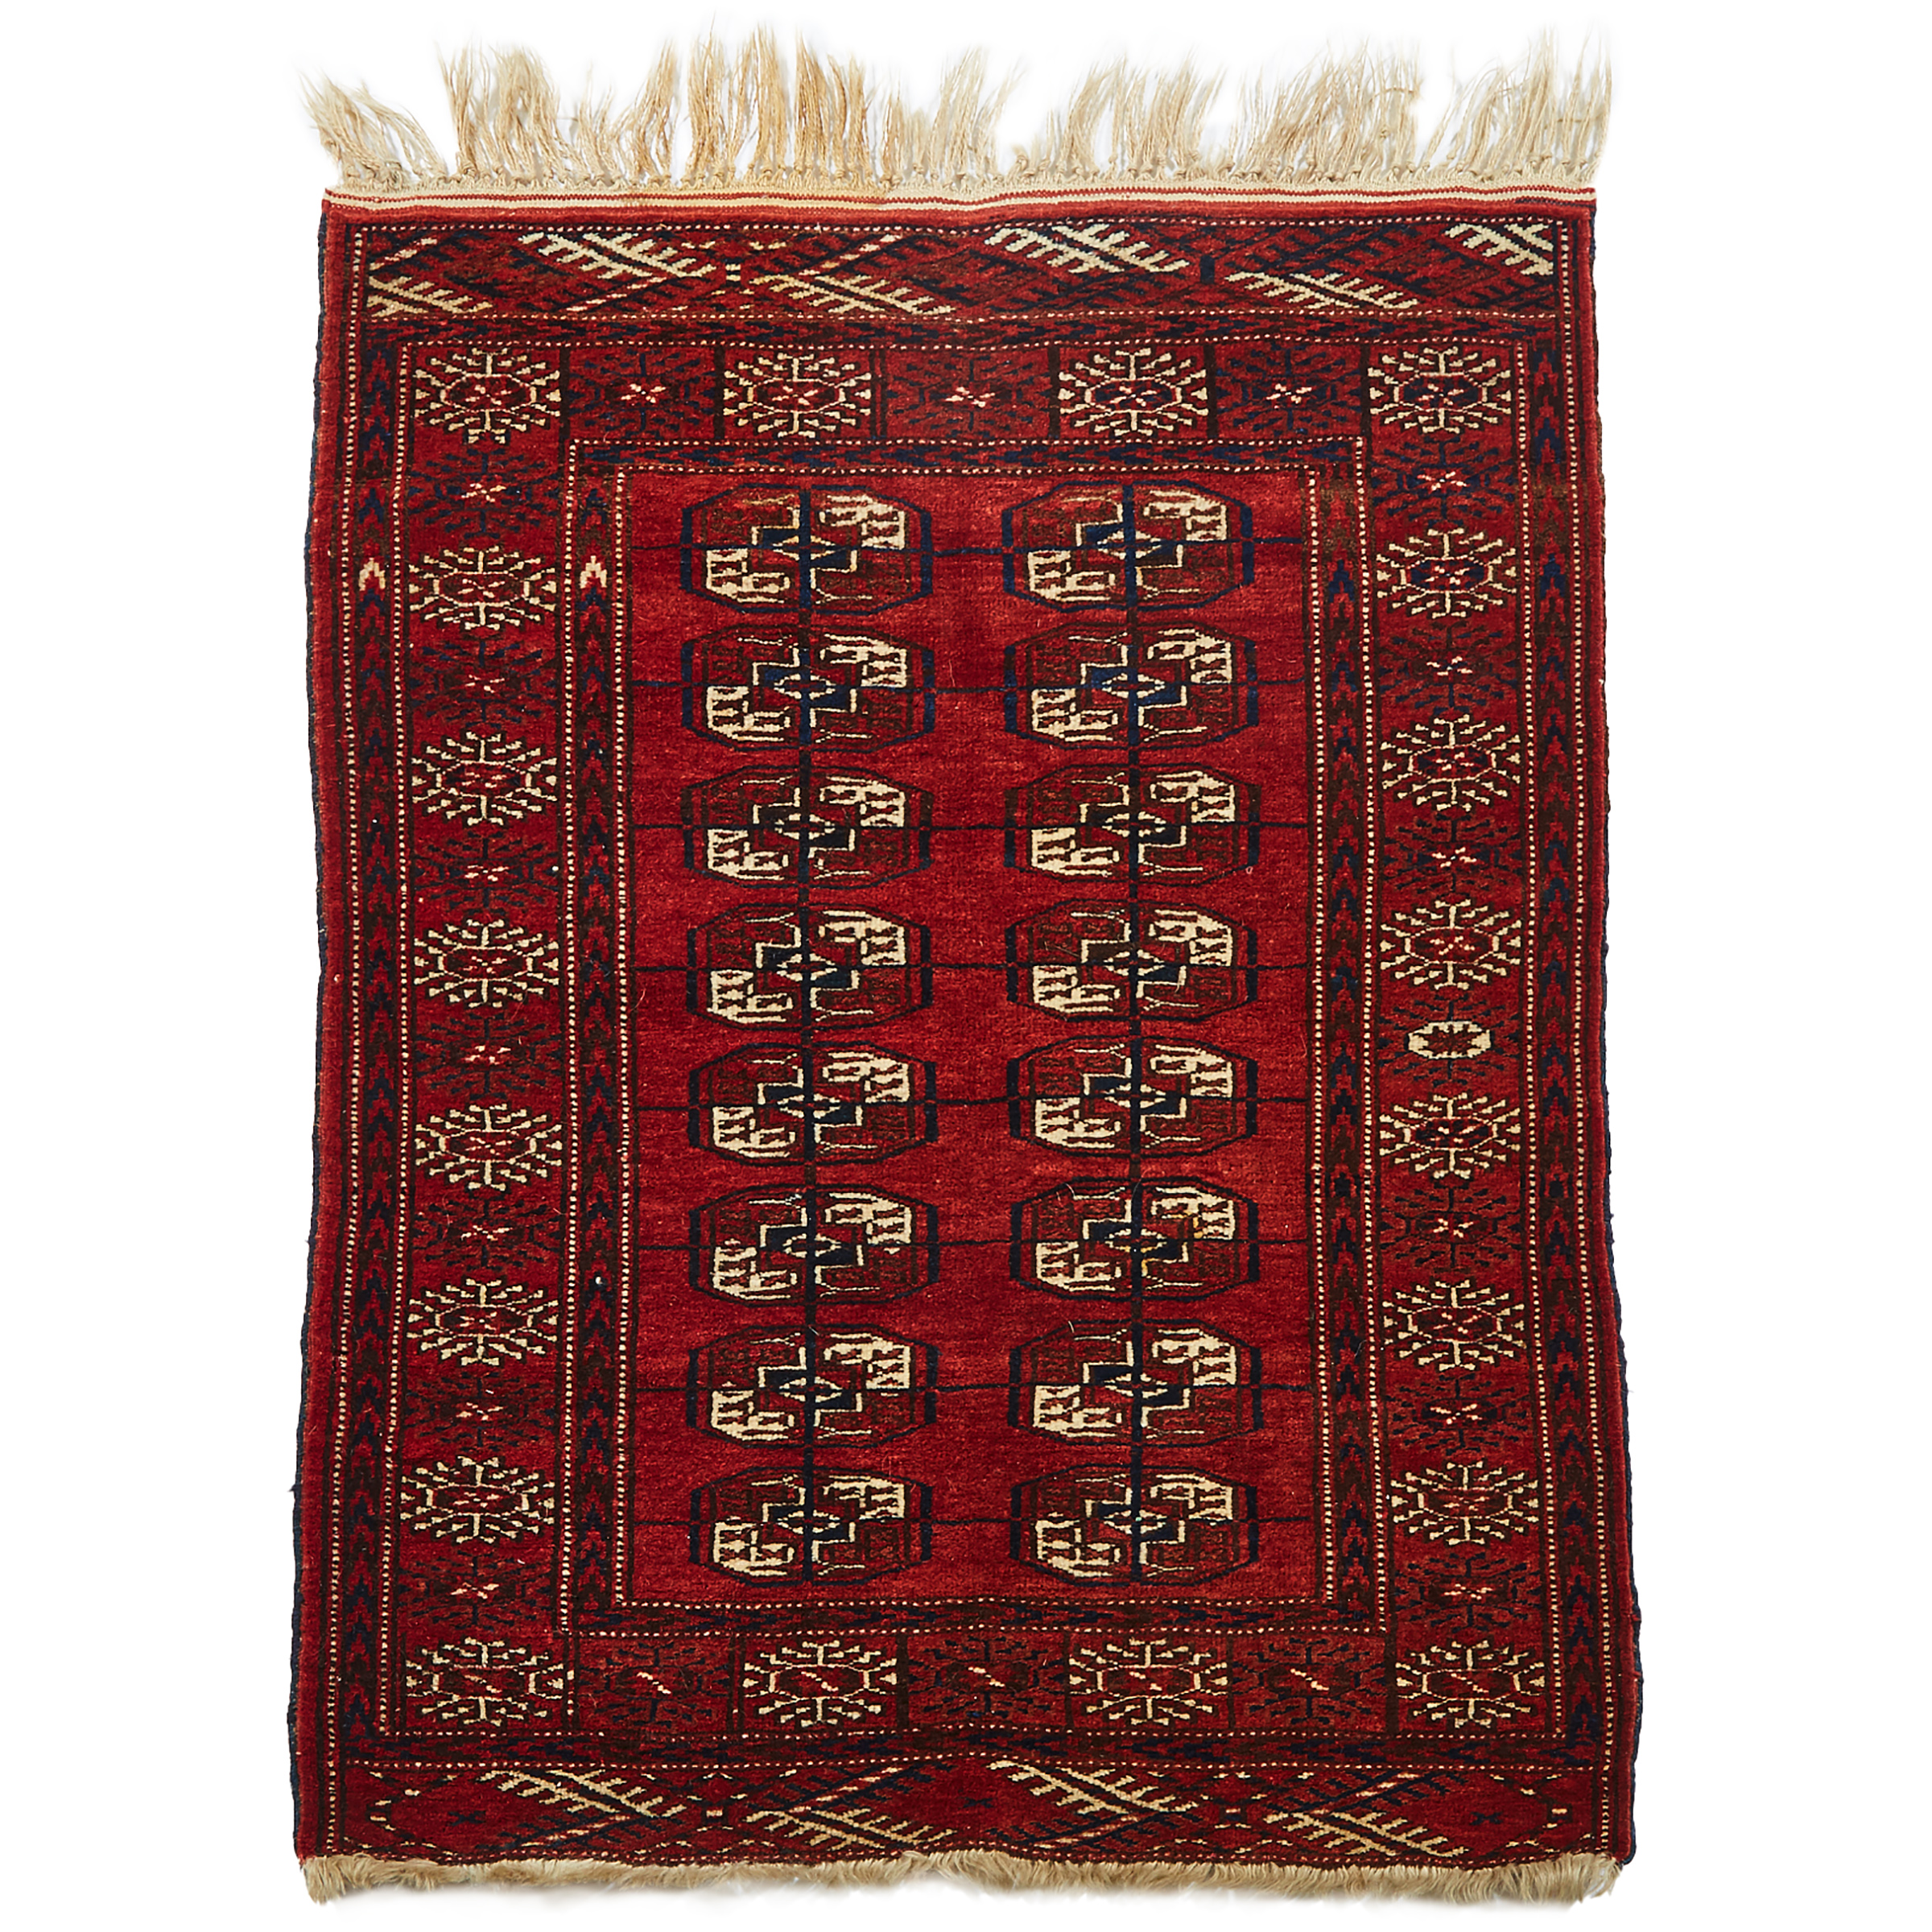 Tekke Rug, Central Asia,  mid to late 20th century